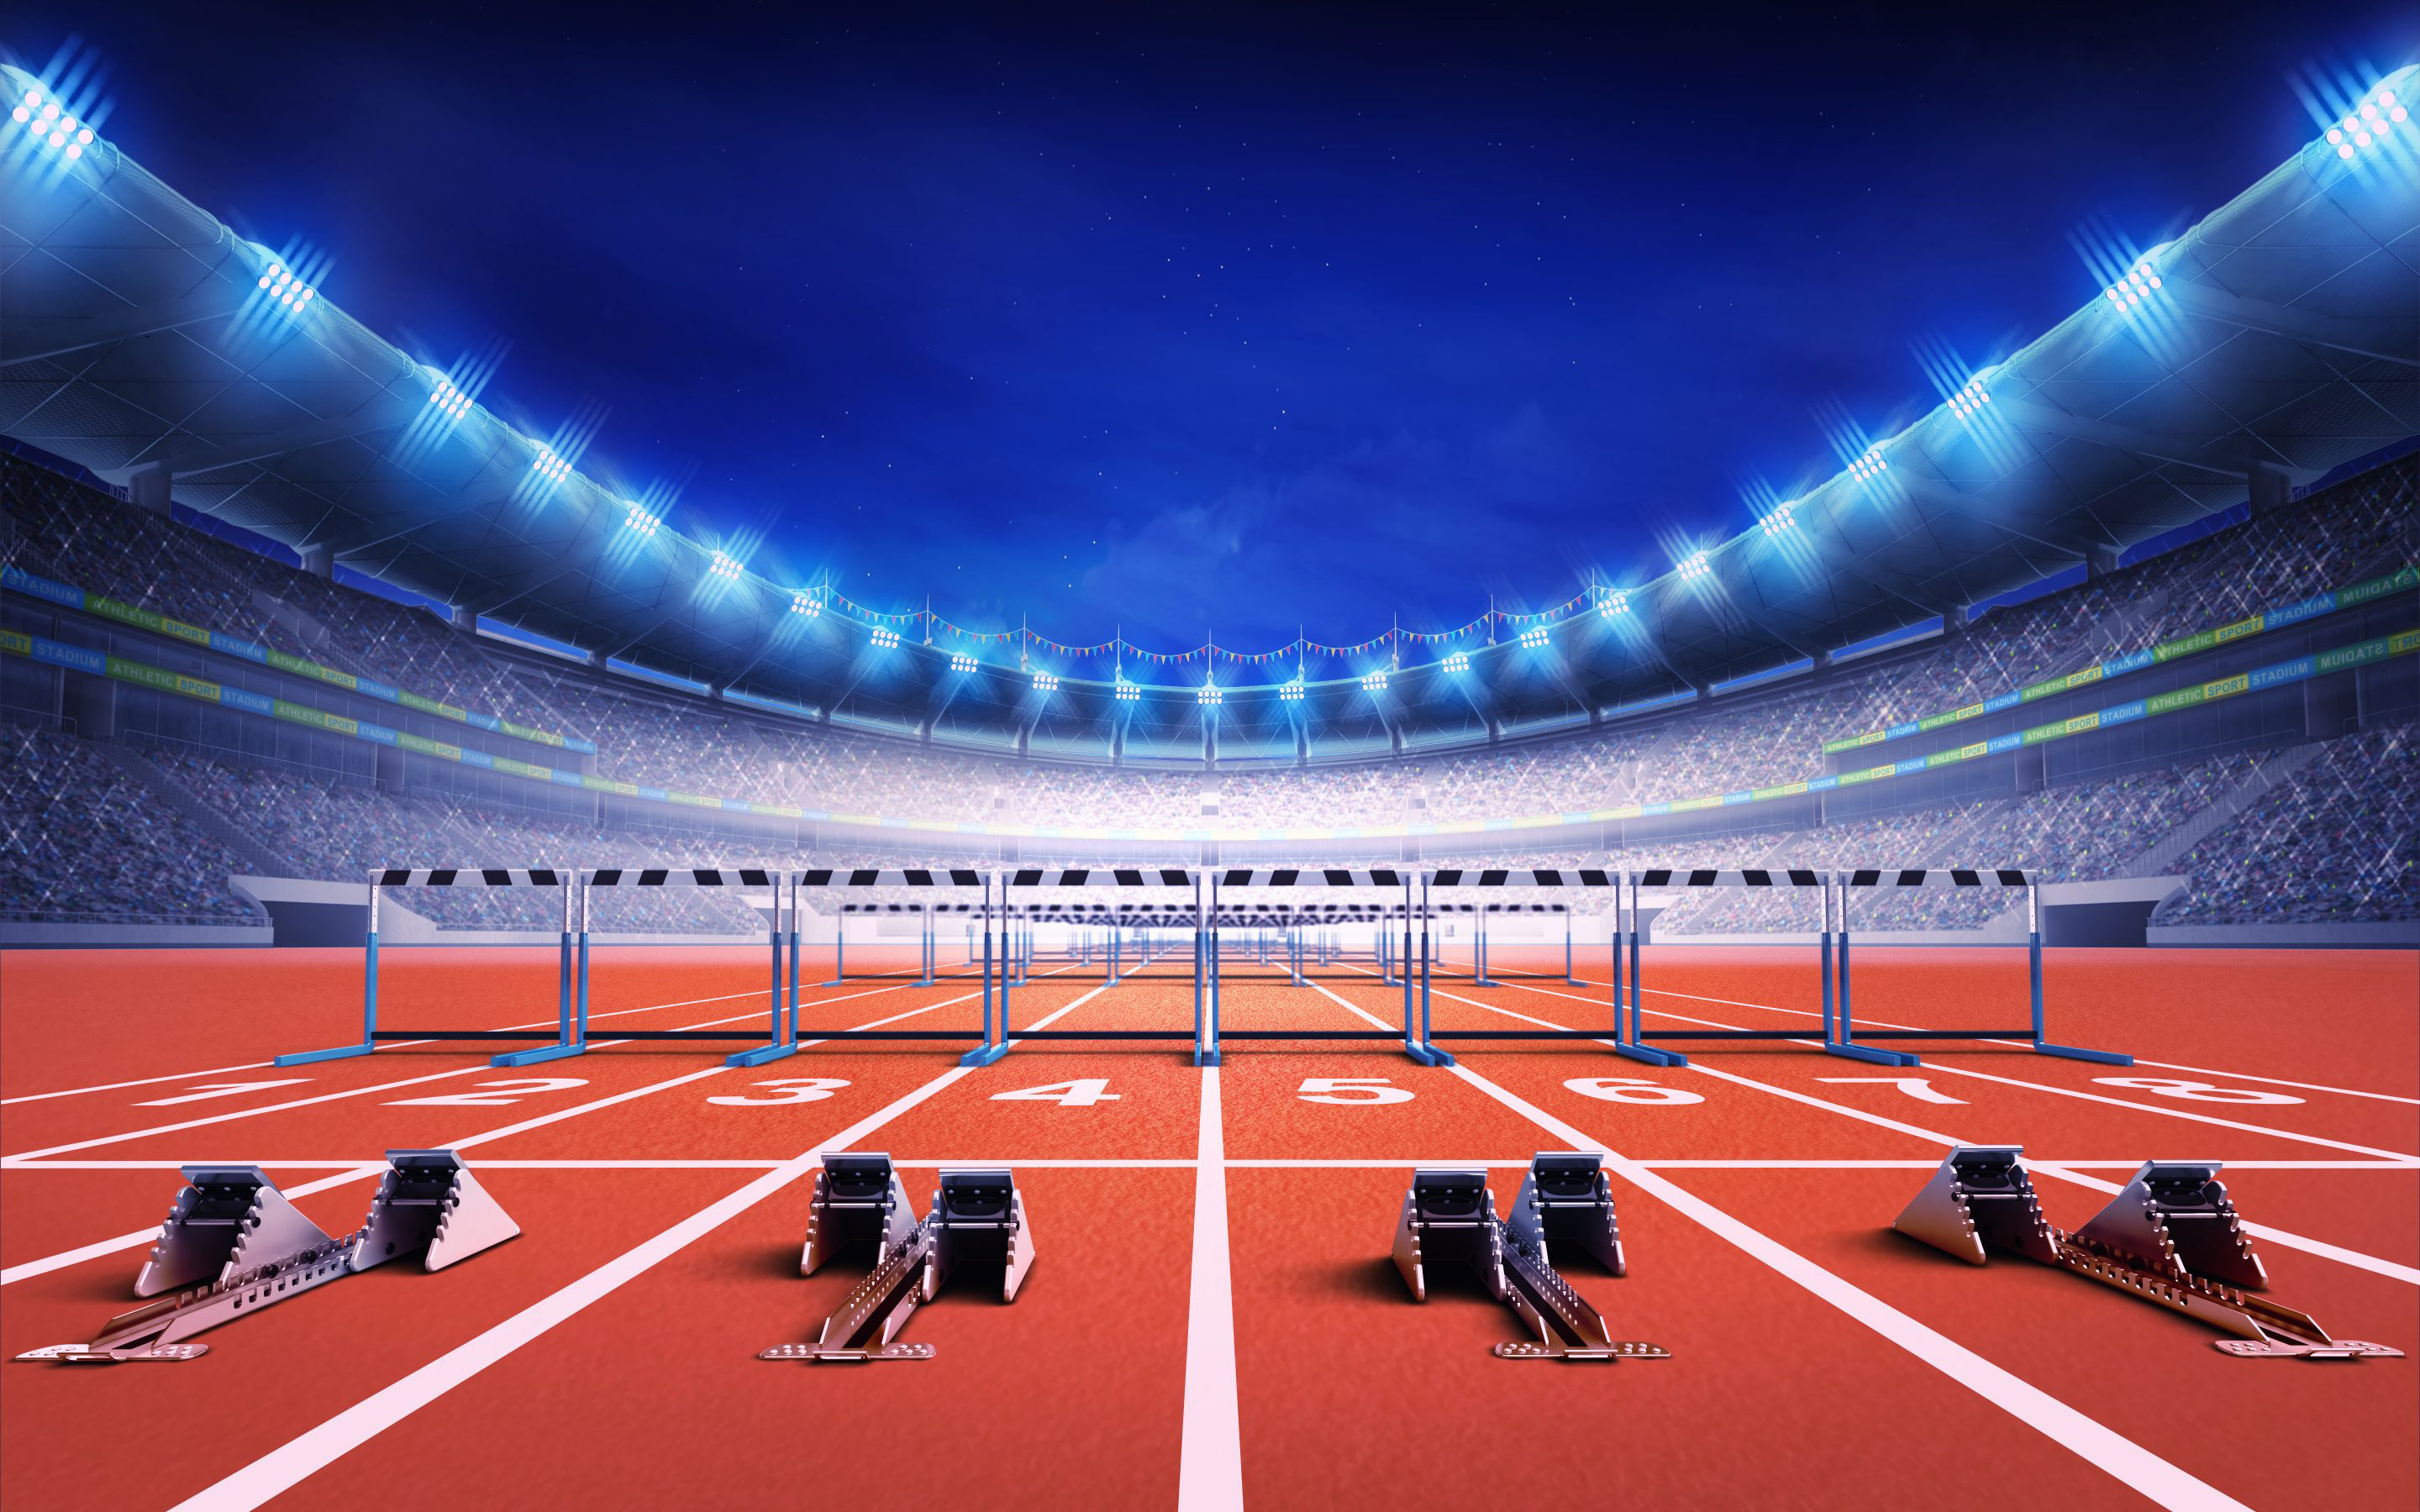 Hurdling: Athletics stadium, Sprint race with hurdles, Track and field athletics, Sports competitions. 2880x1800 HD Background.